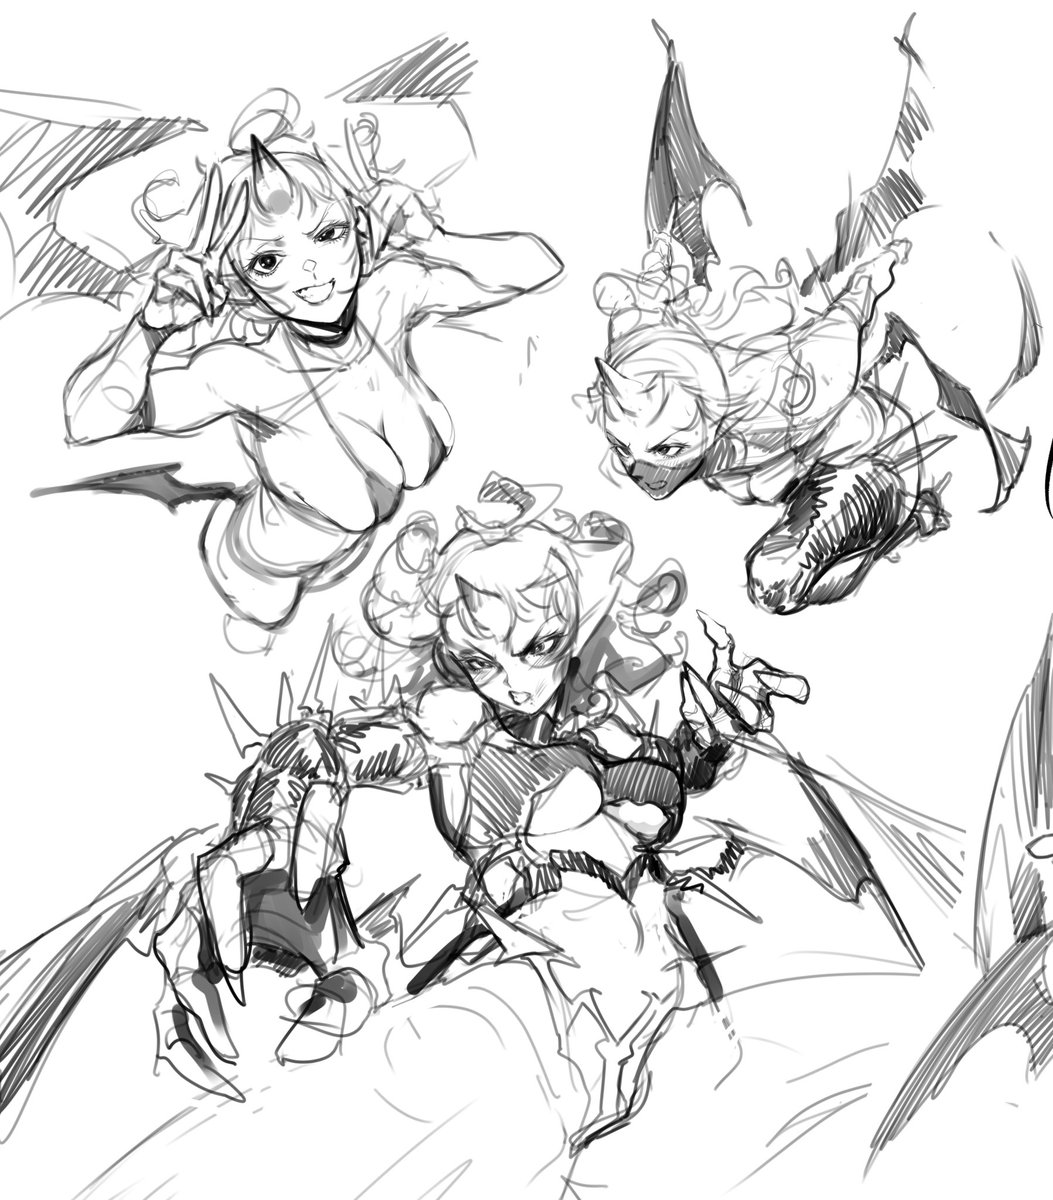 [oc] succubus whos clothing can change into armor? idk im just spitballin ideas here 